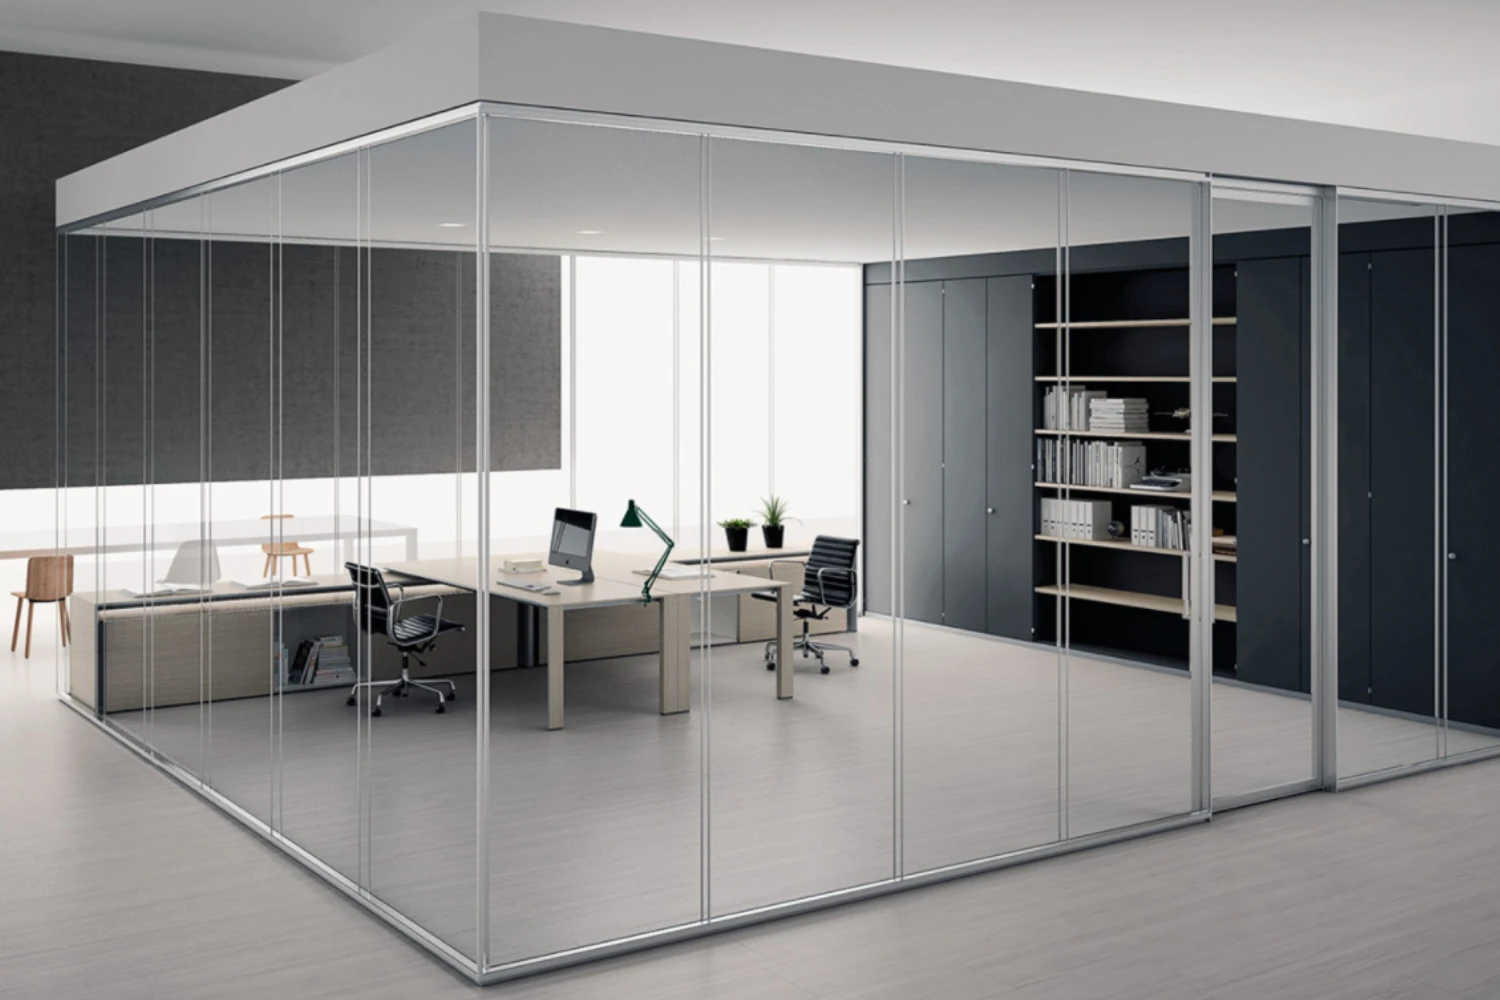 Glass partitions